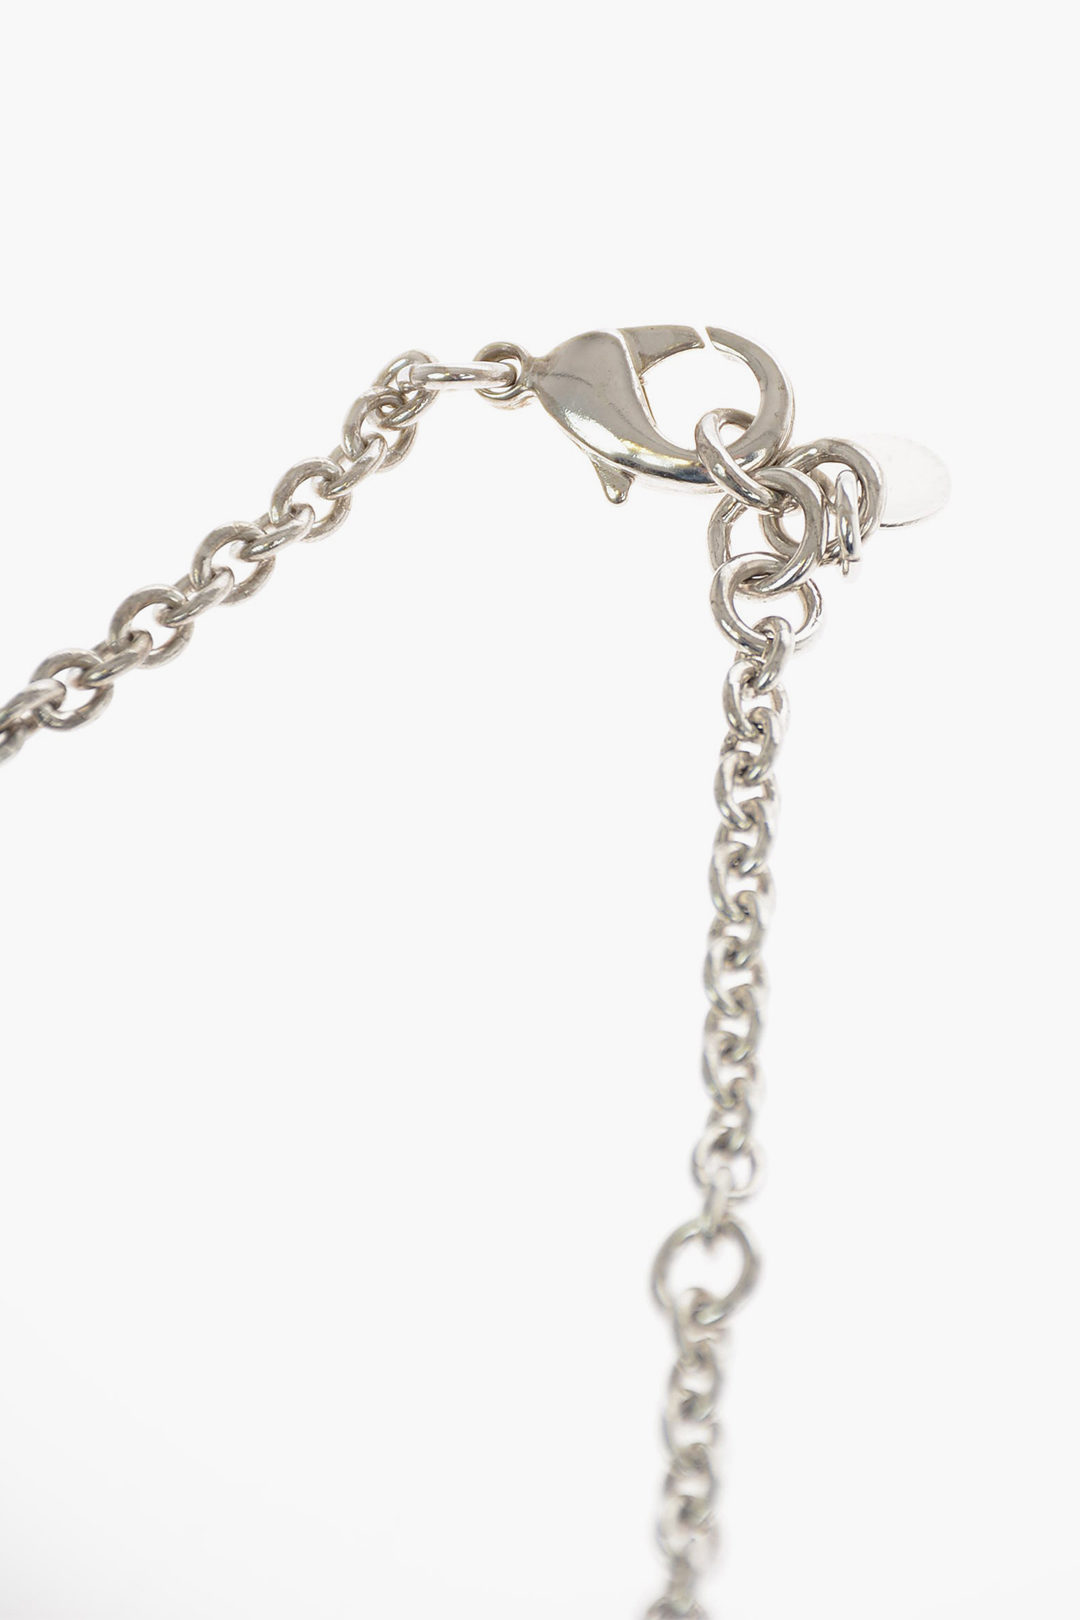 Maison Margiela MM6 Chain Necklace with Pendant women - Glamood Outlet